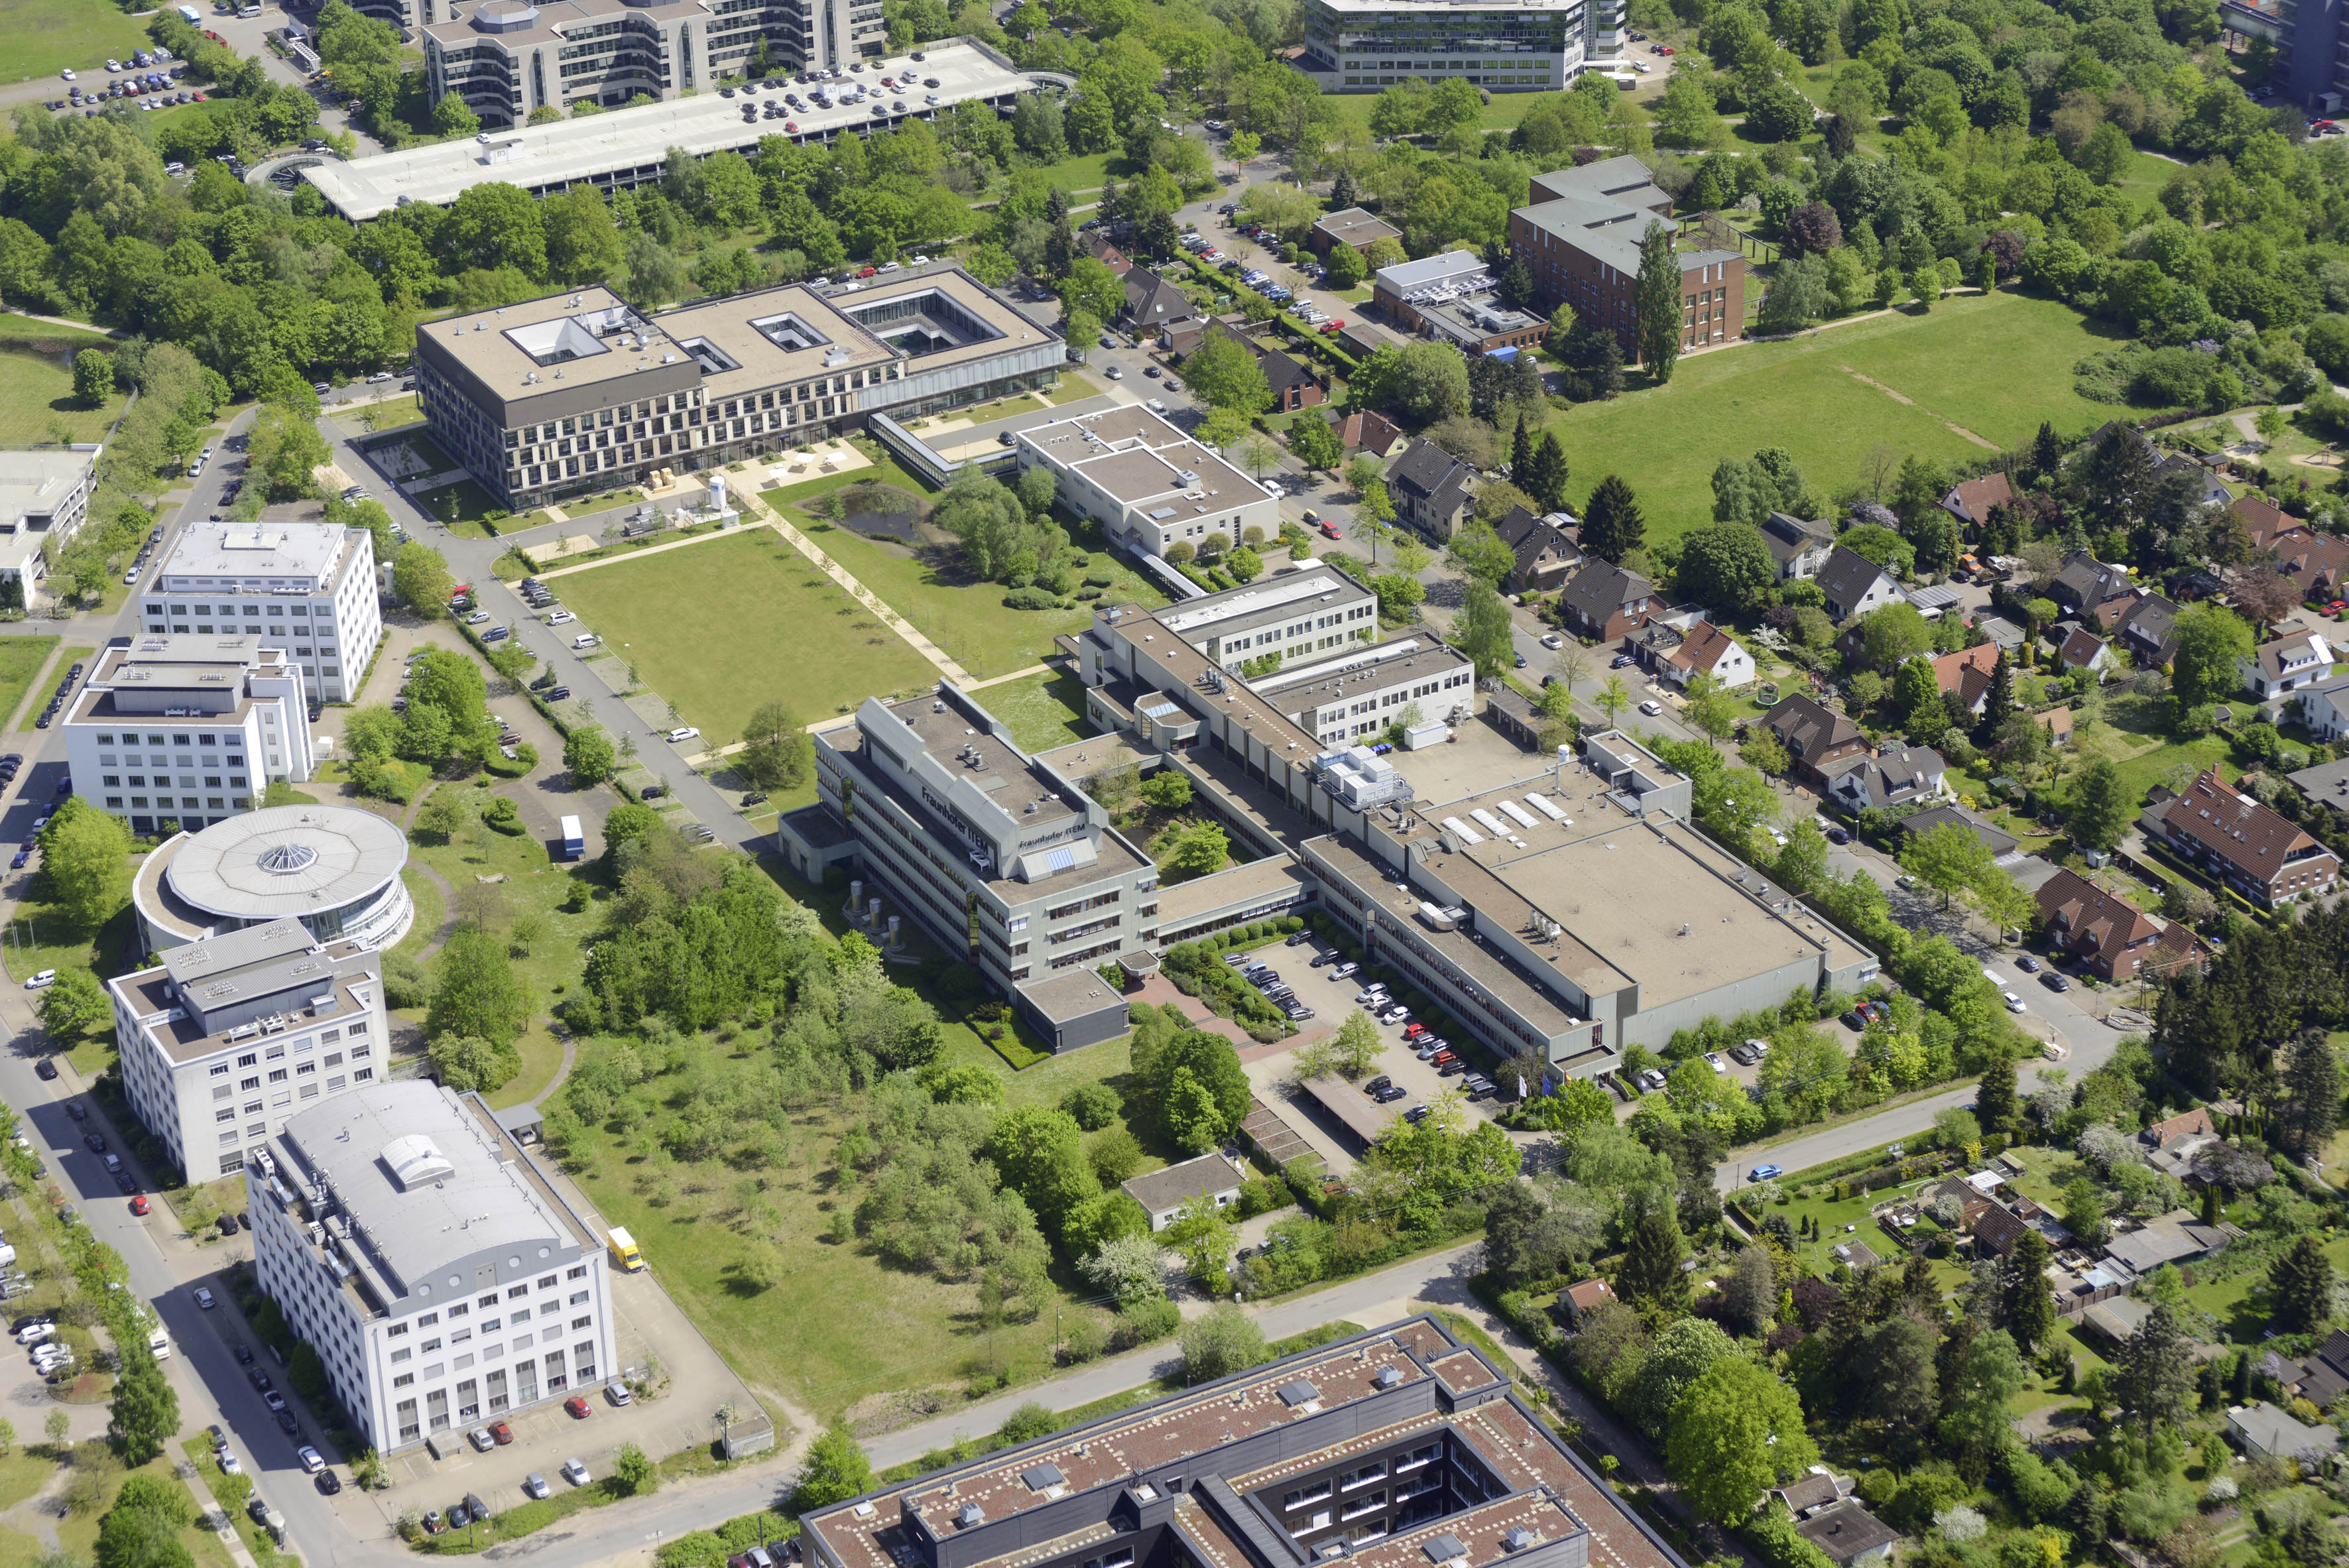 Aerial view of the Fraunhofer ITEM